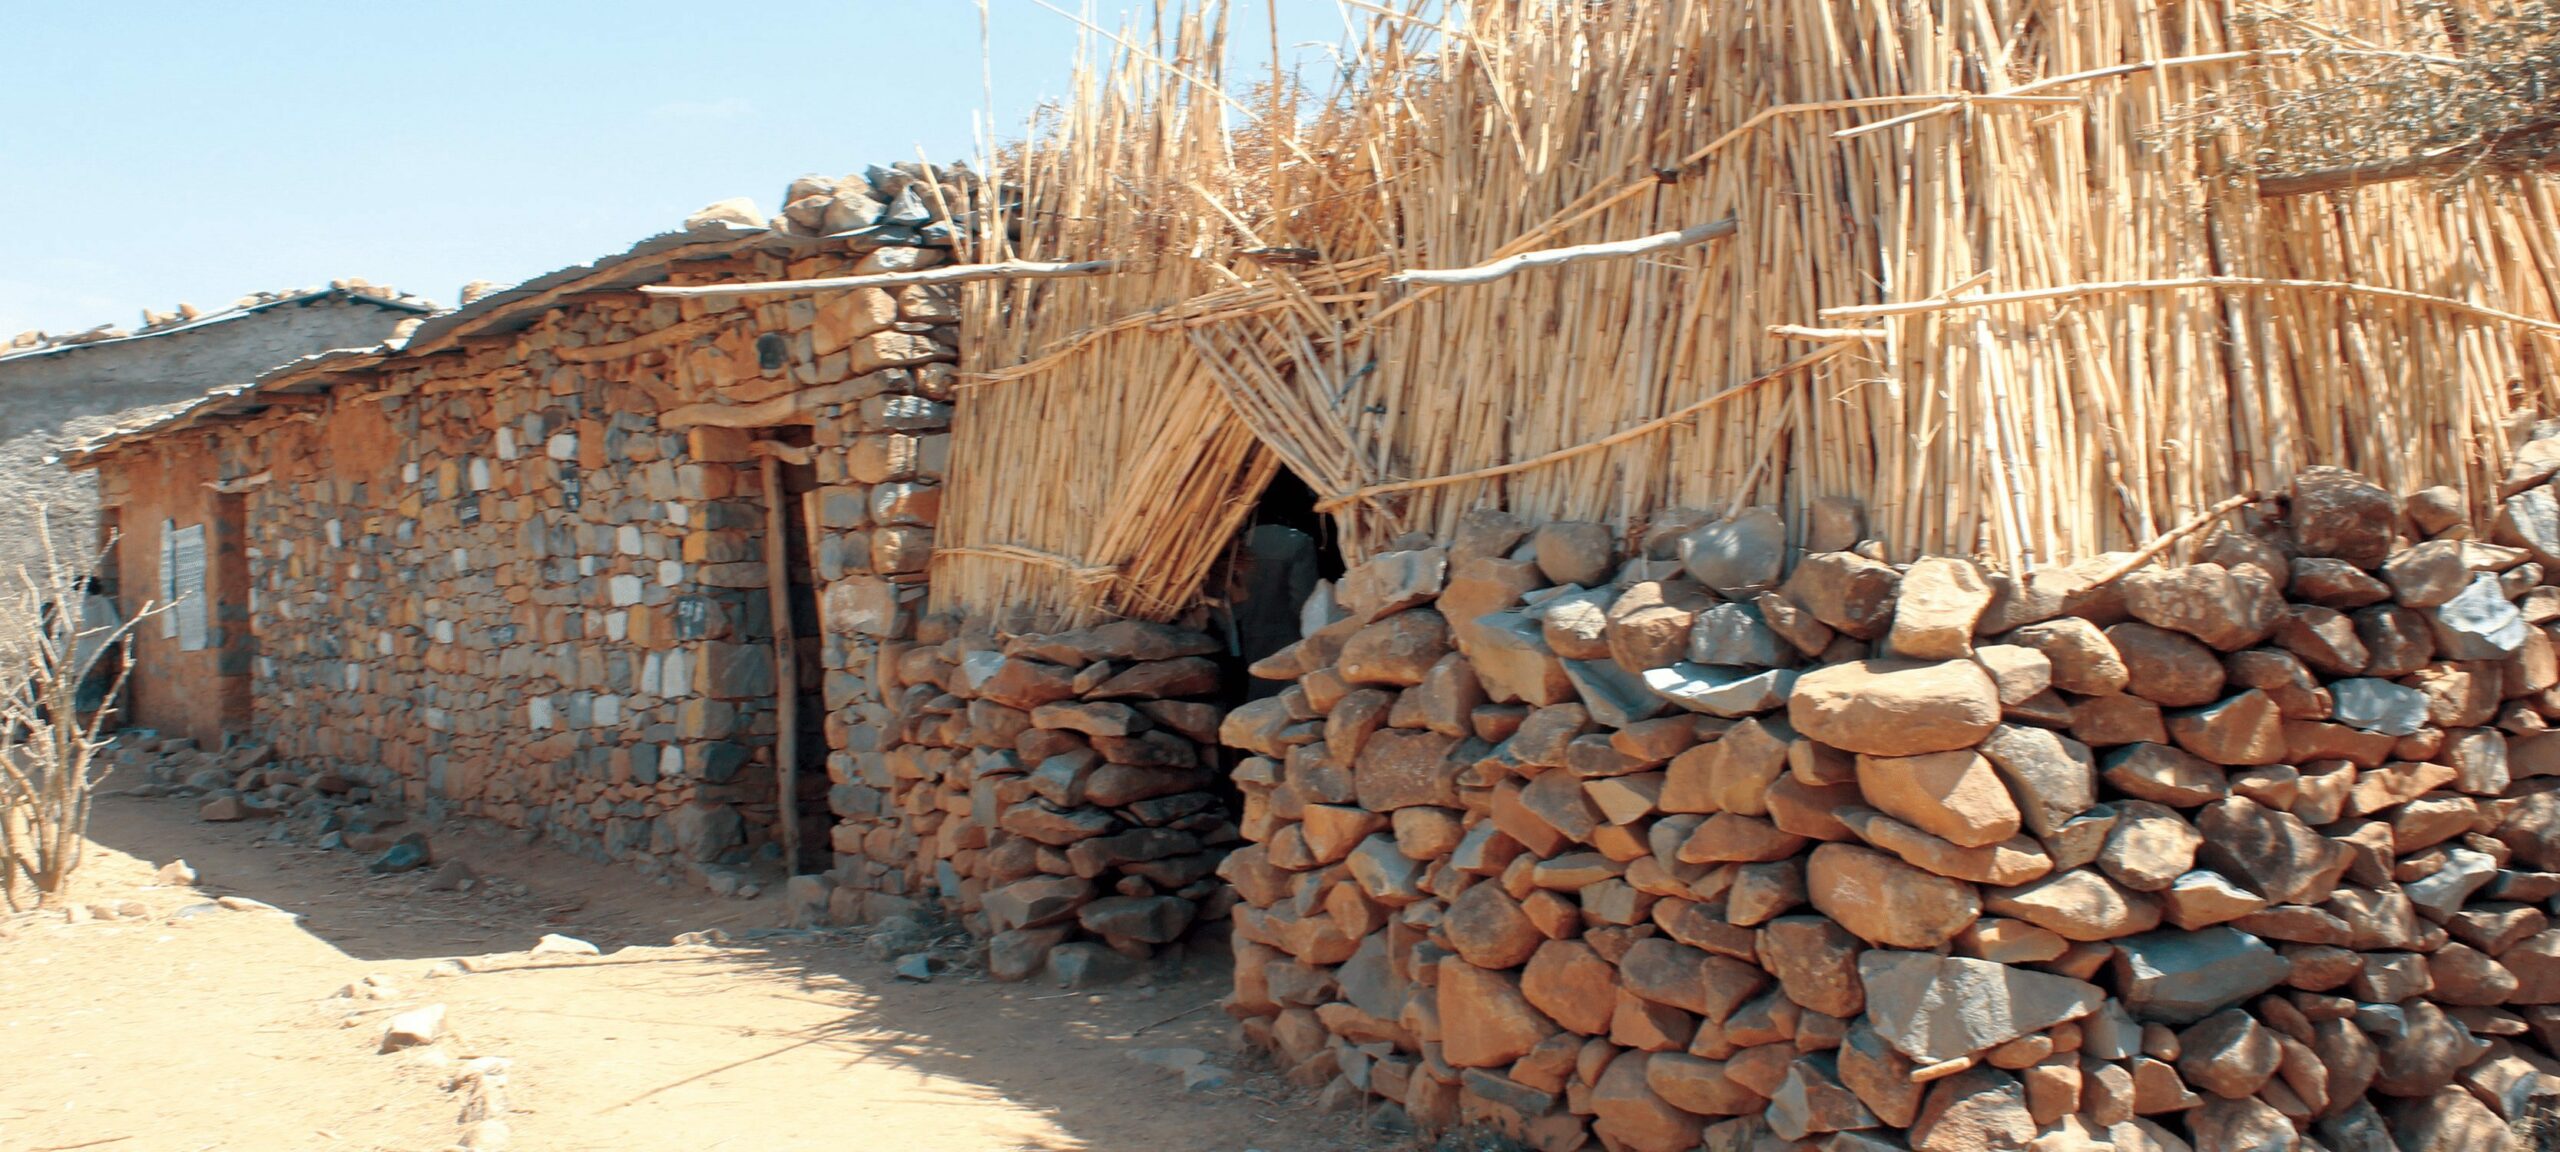 Examples of classrooms at Adisenay School, constructed of stones balanced on top of each other and sticks to create a roof.